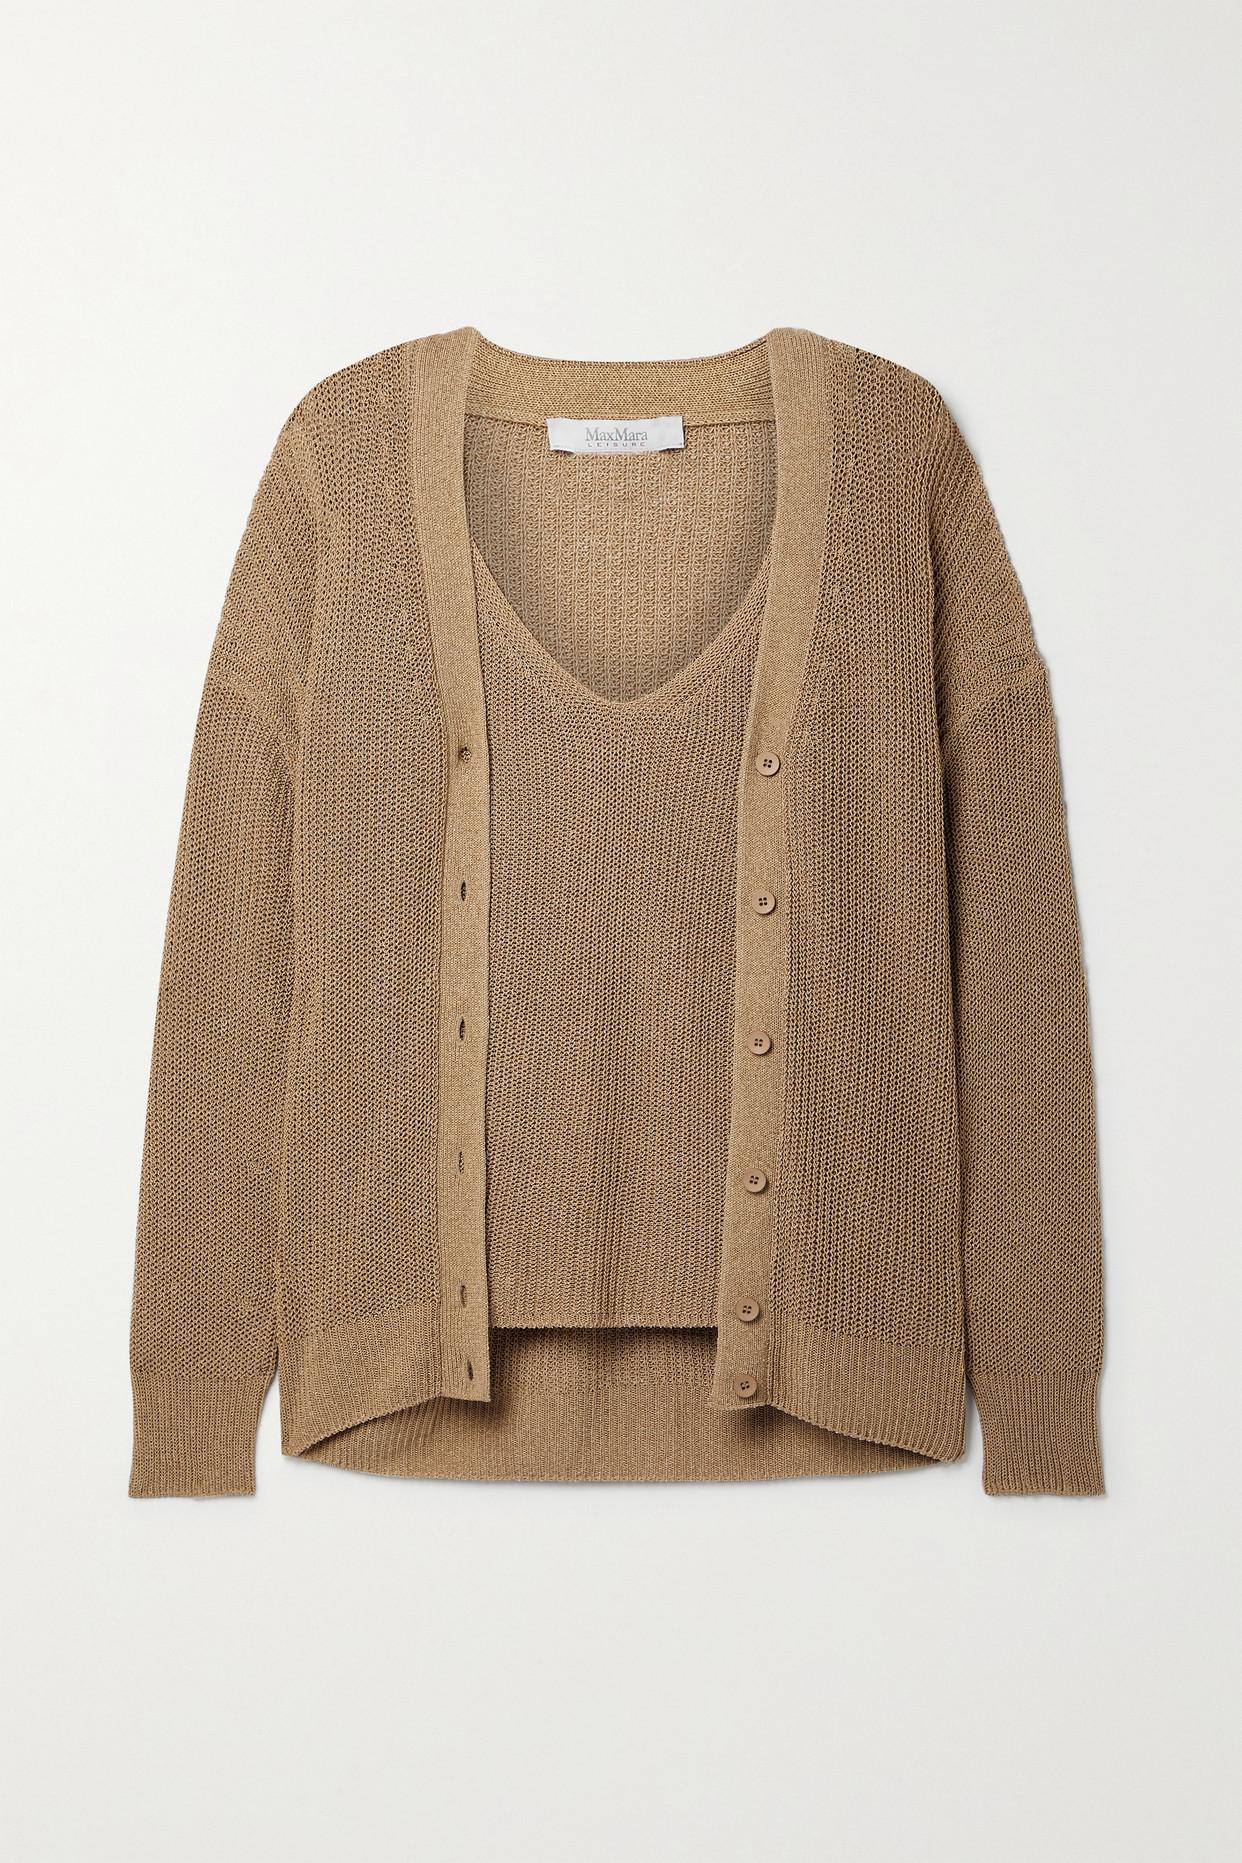 Max Mara Leisure Tenue Layered Knitted Cardigan in Natural | Lyst